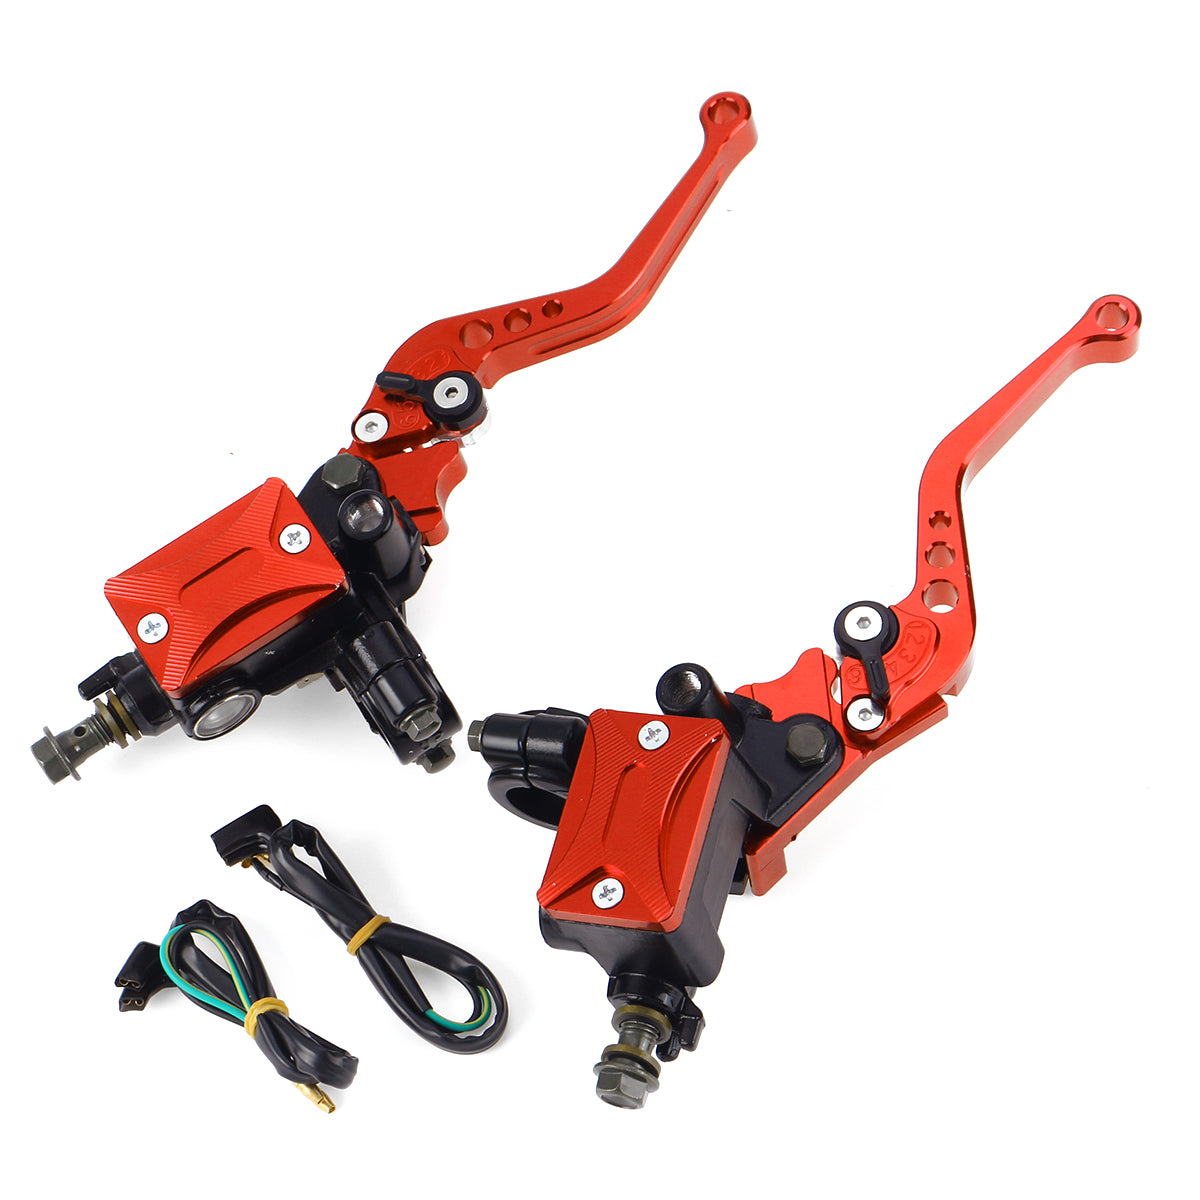 Firebrick 7/8 Inch 22mm Motorcycle Hydraulic Brake Clutch Master Cylinder Reservoir Lever With Cable Aluminum Universal